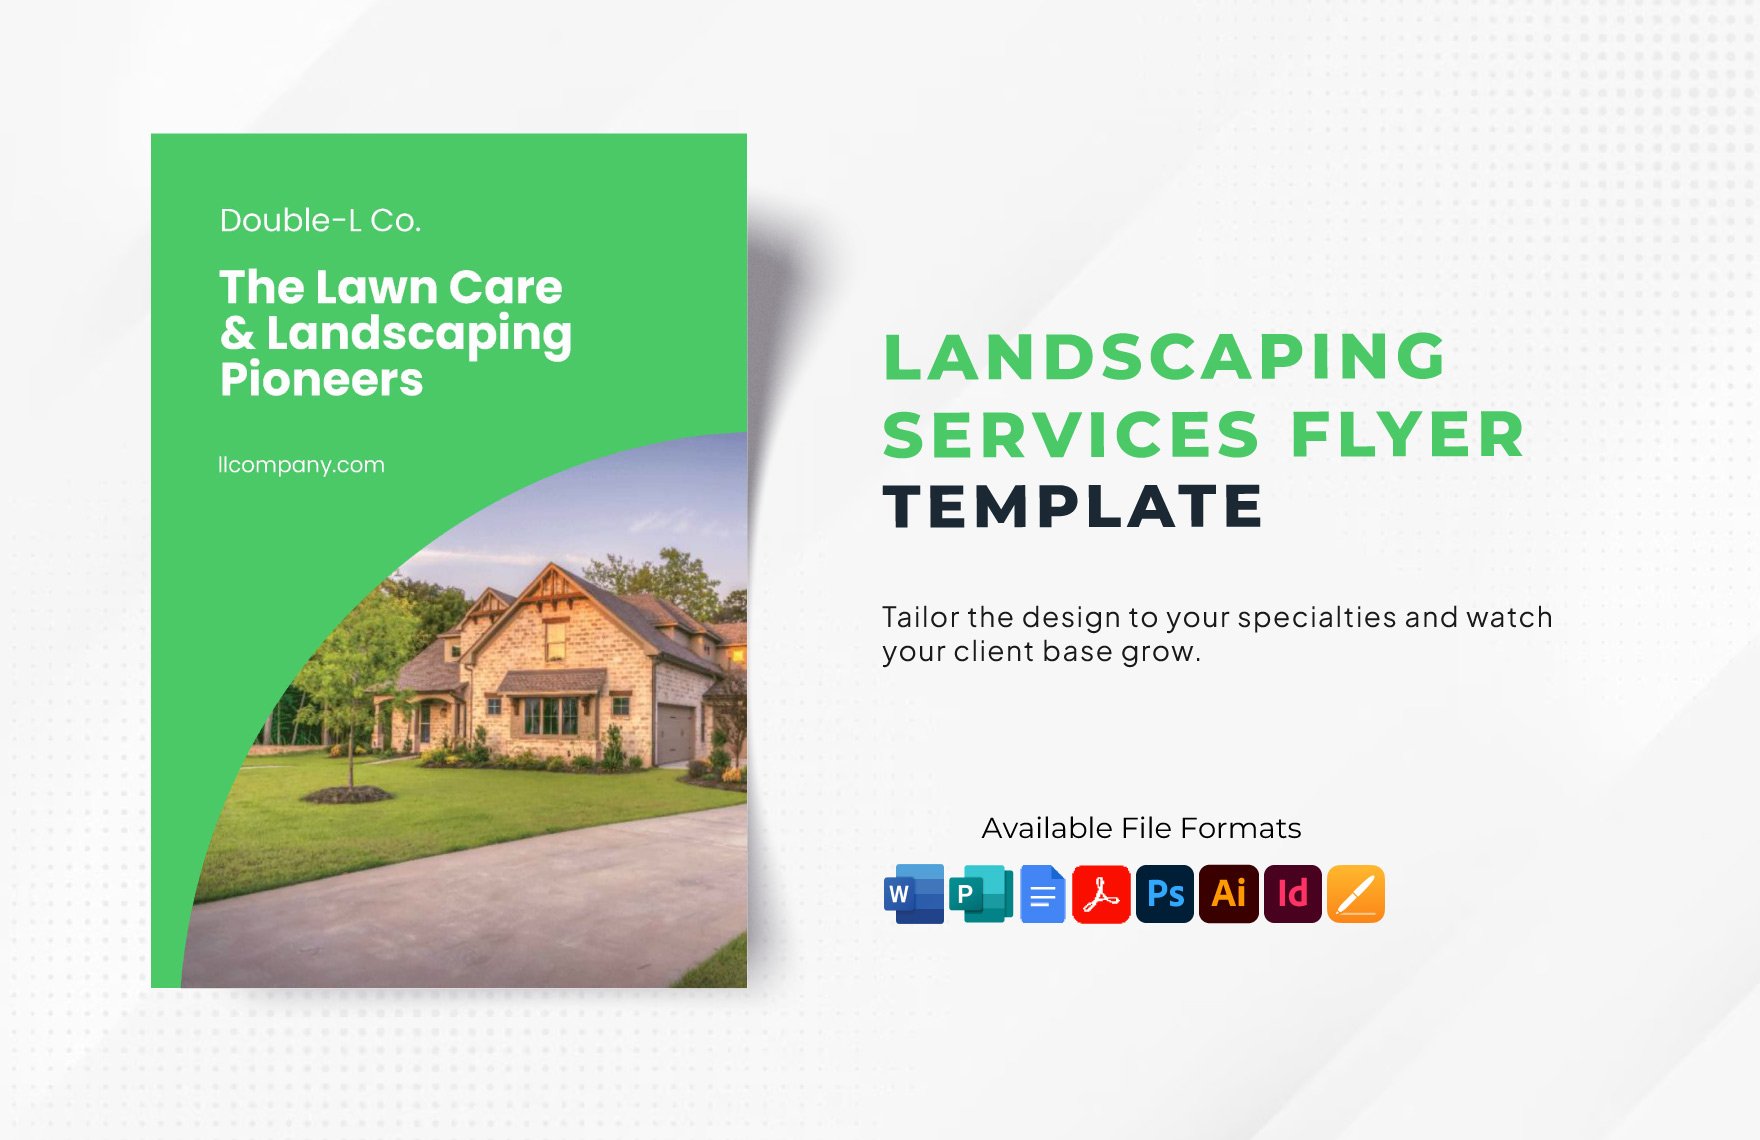 Landscaping Services Flyer Template